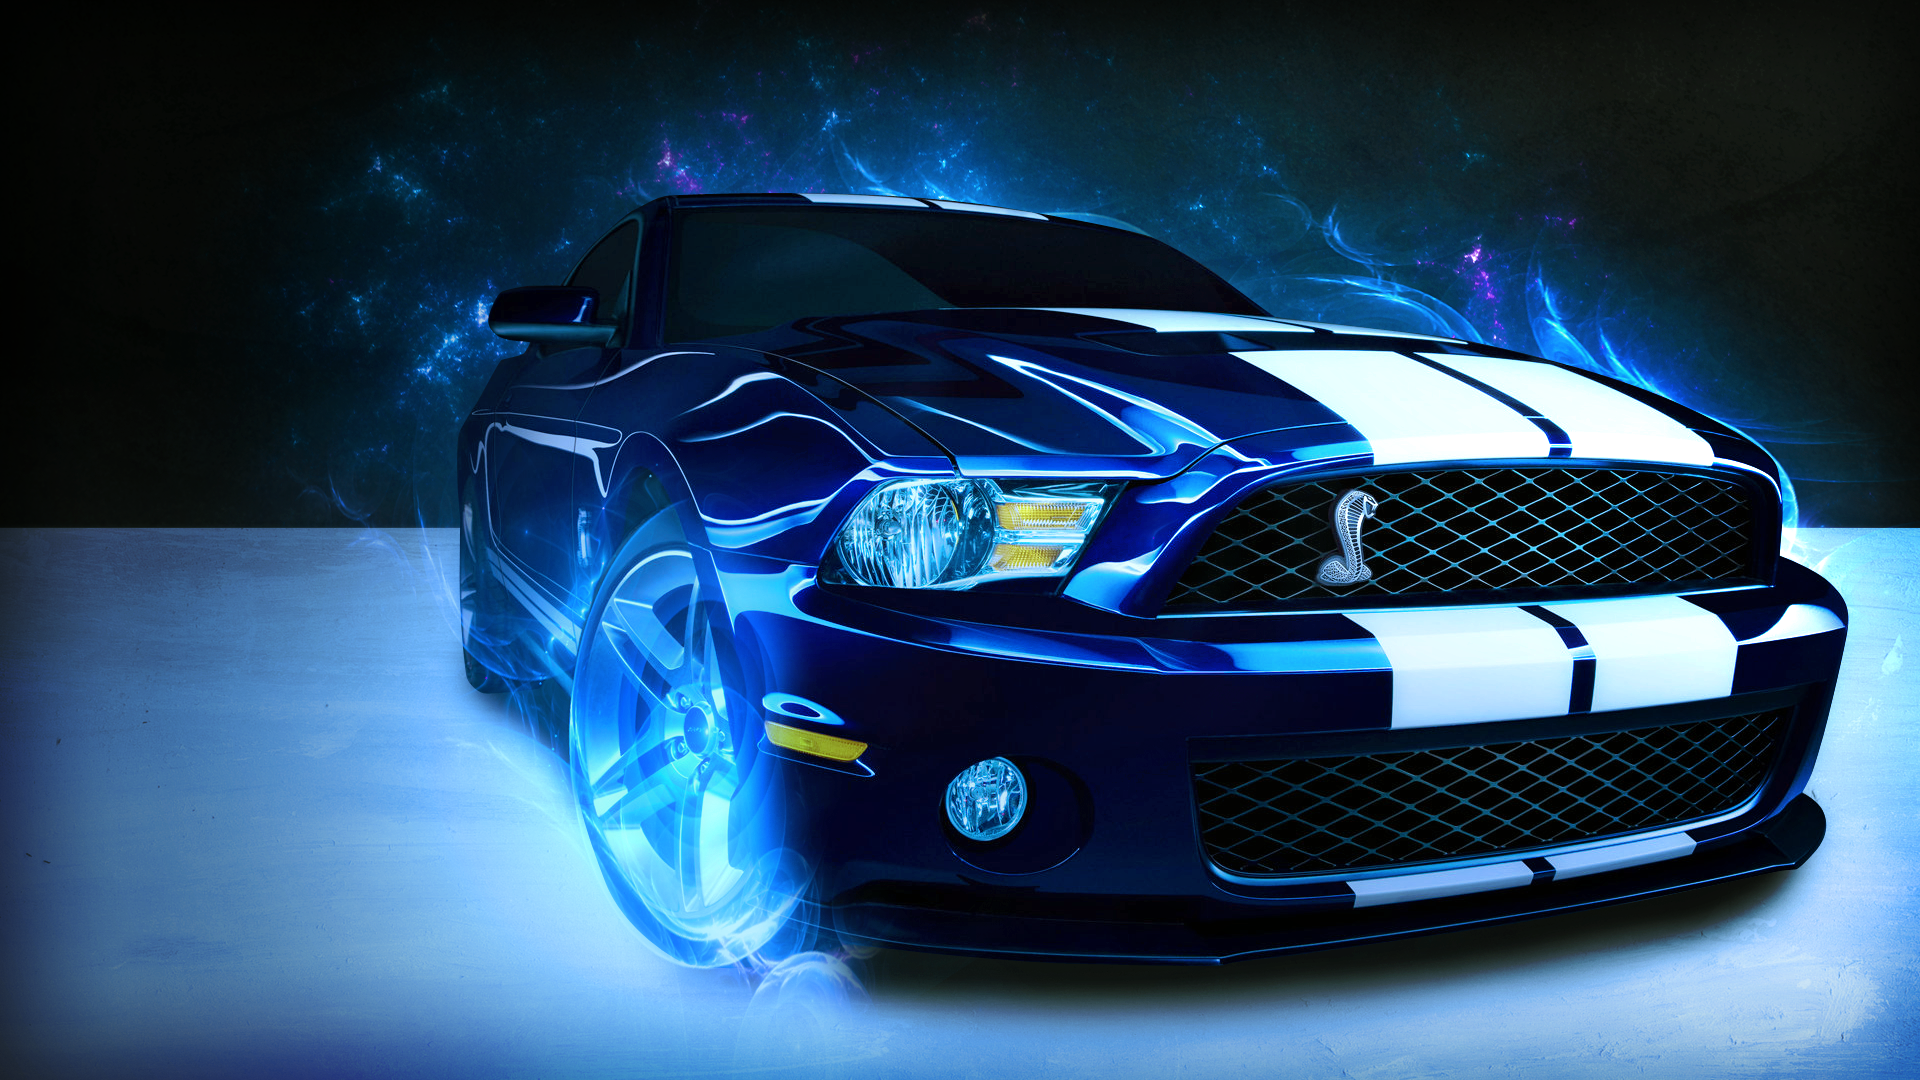 Shelby Mustang 1080p Wallpaper By Markydman Customization